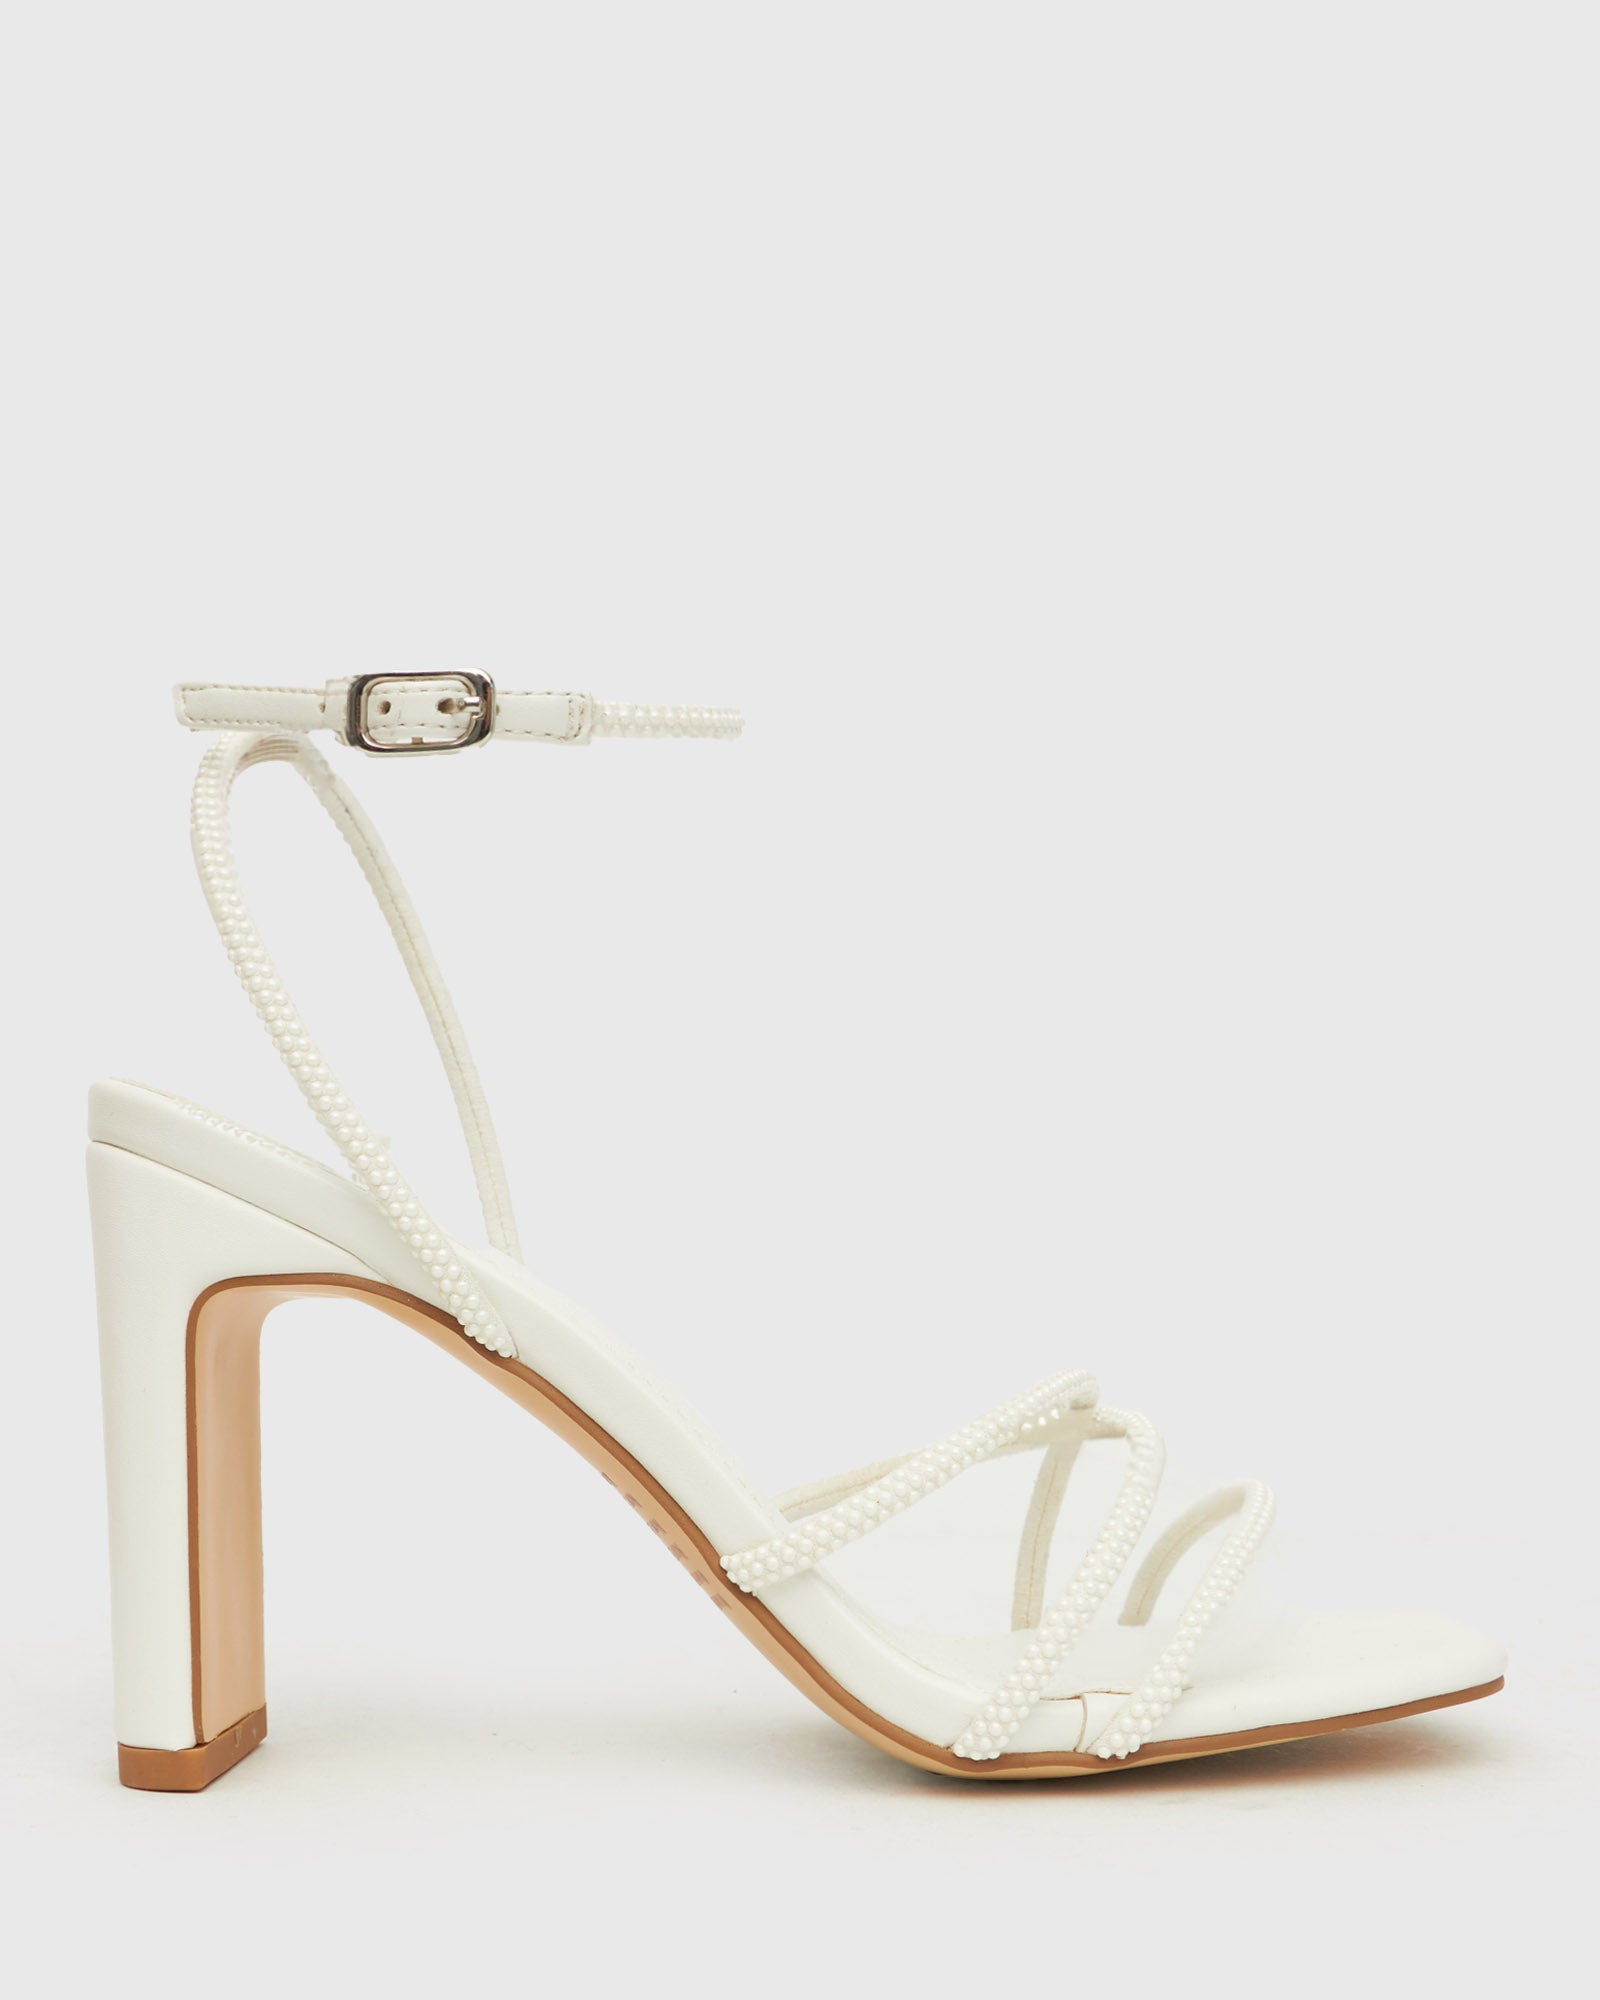 Buy KLOSS Pearl Trim Strappy Sandals by Betts online - Betts